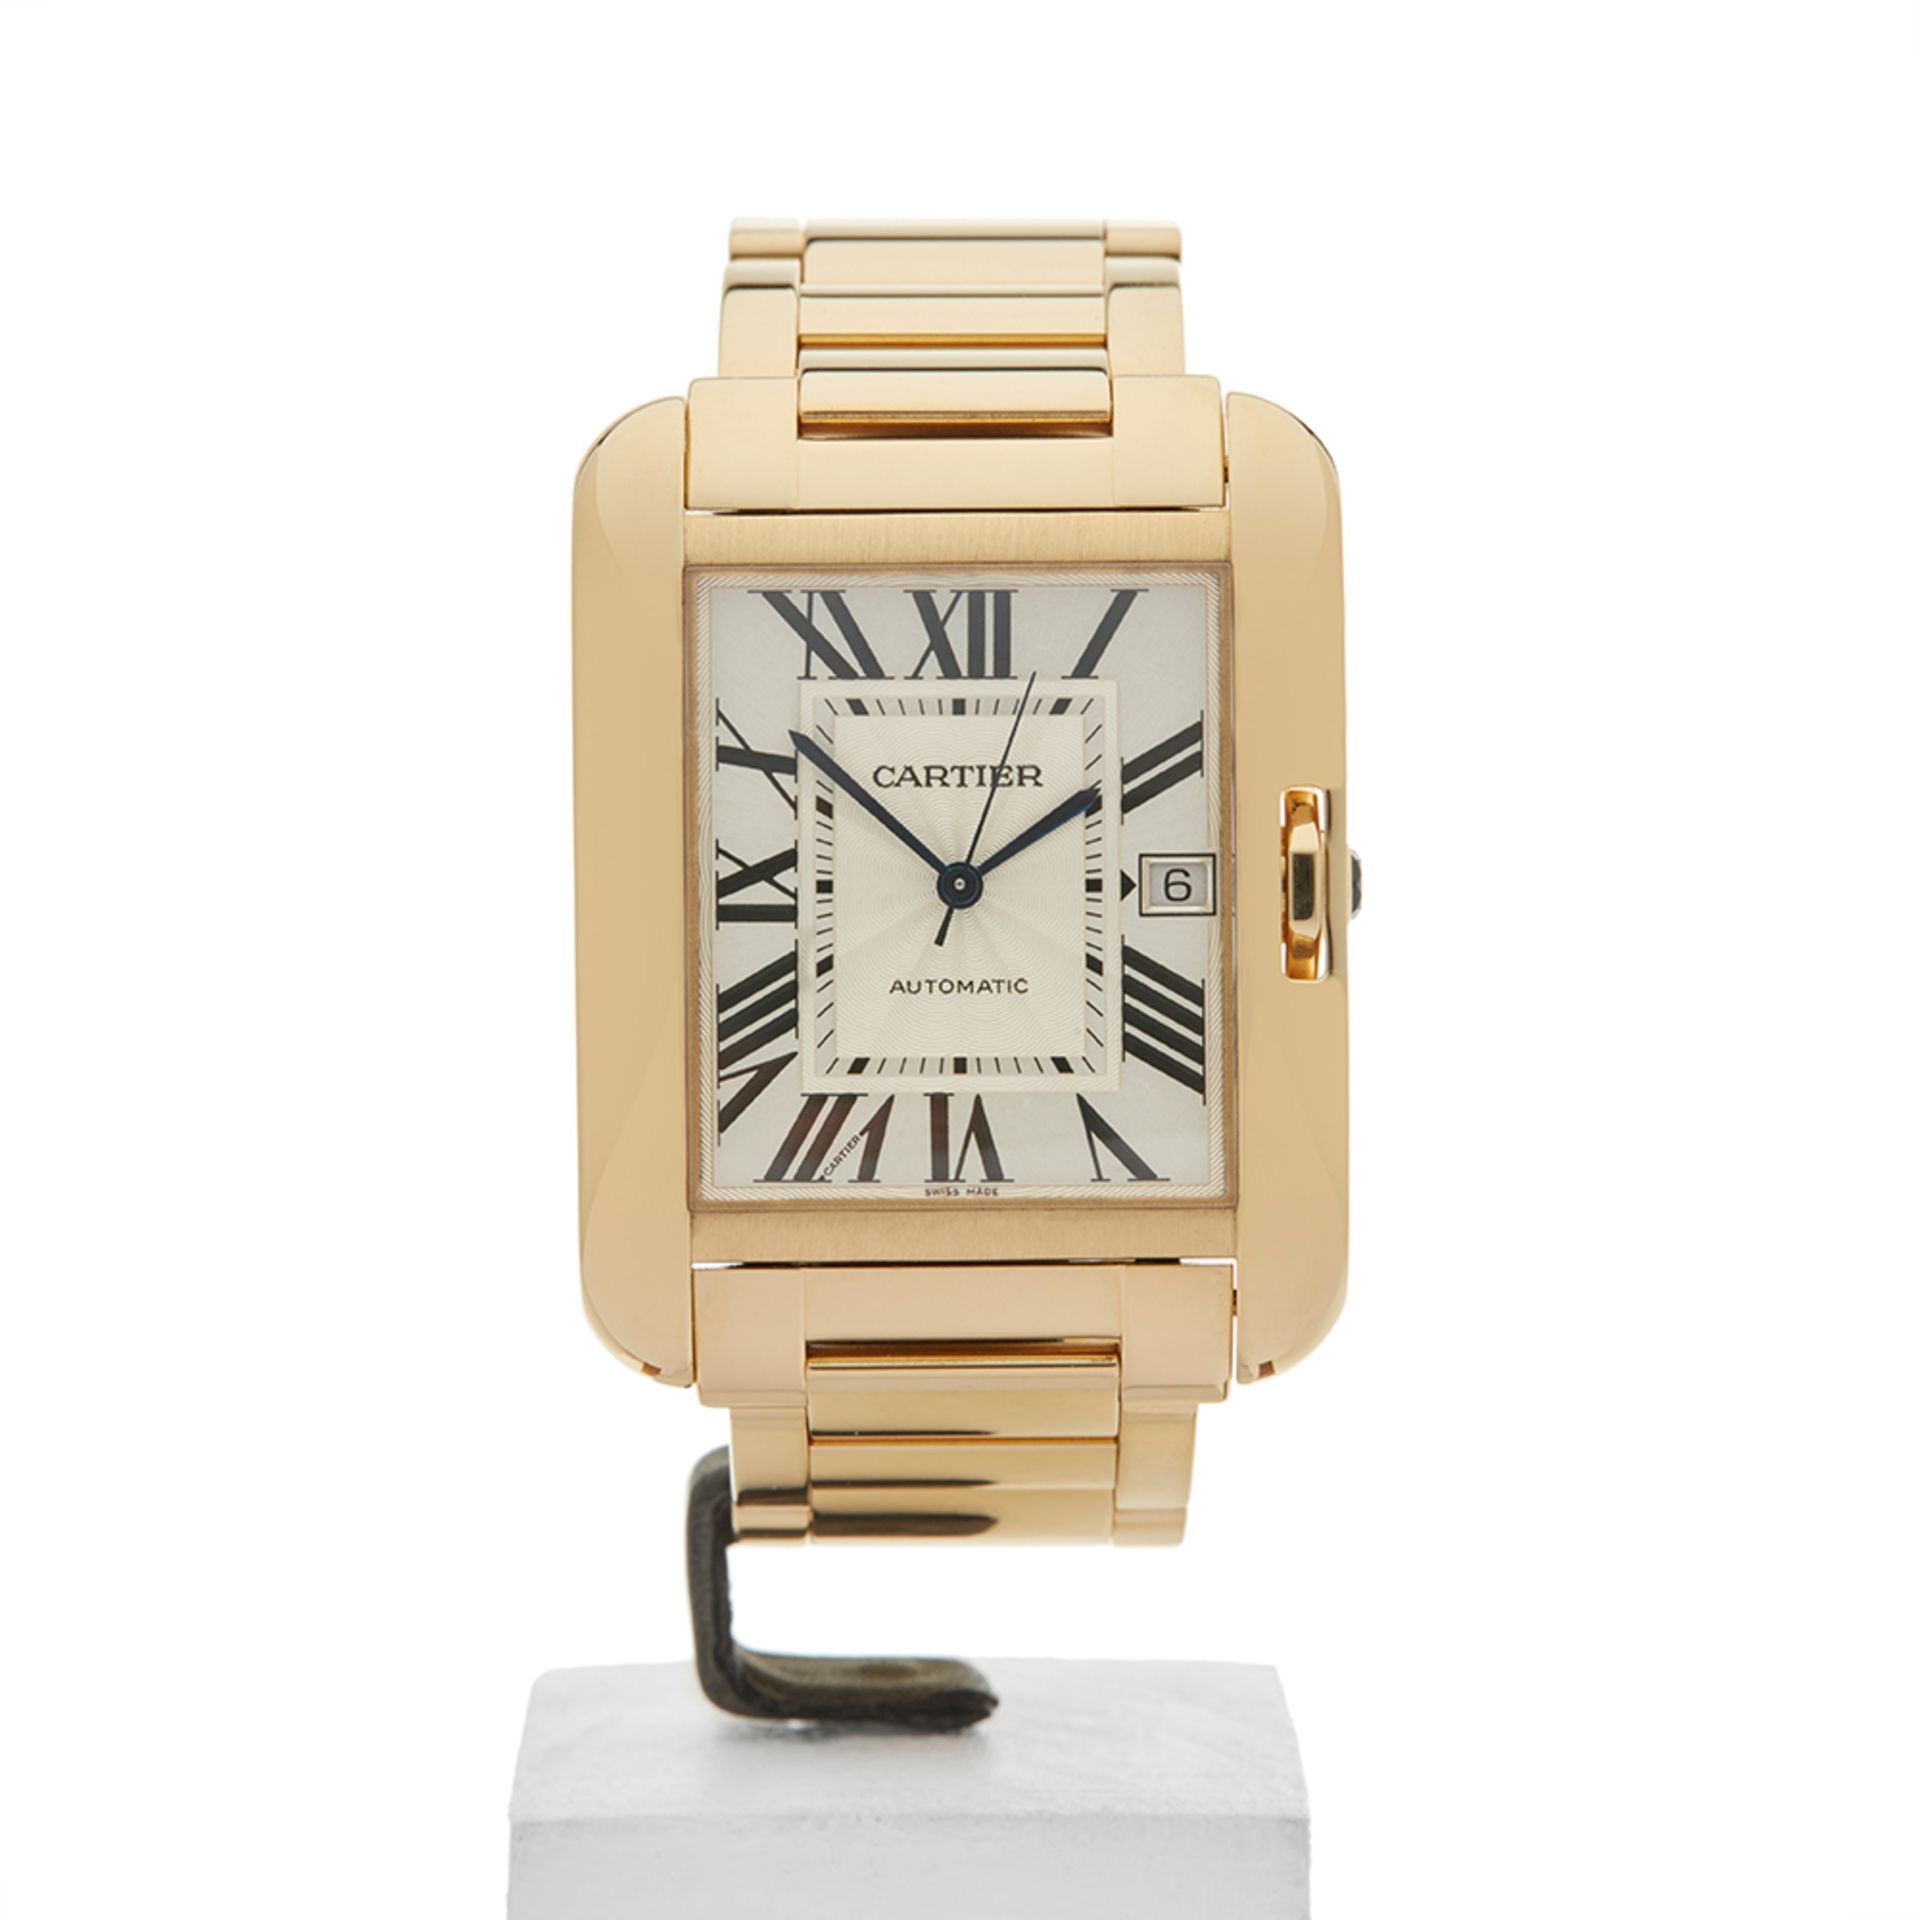 Cartier Tank Anglaise 37mm 18k Yellow Gold - 3505 or W5310018 - Image 2 of 8